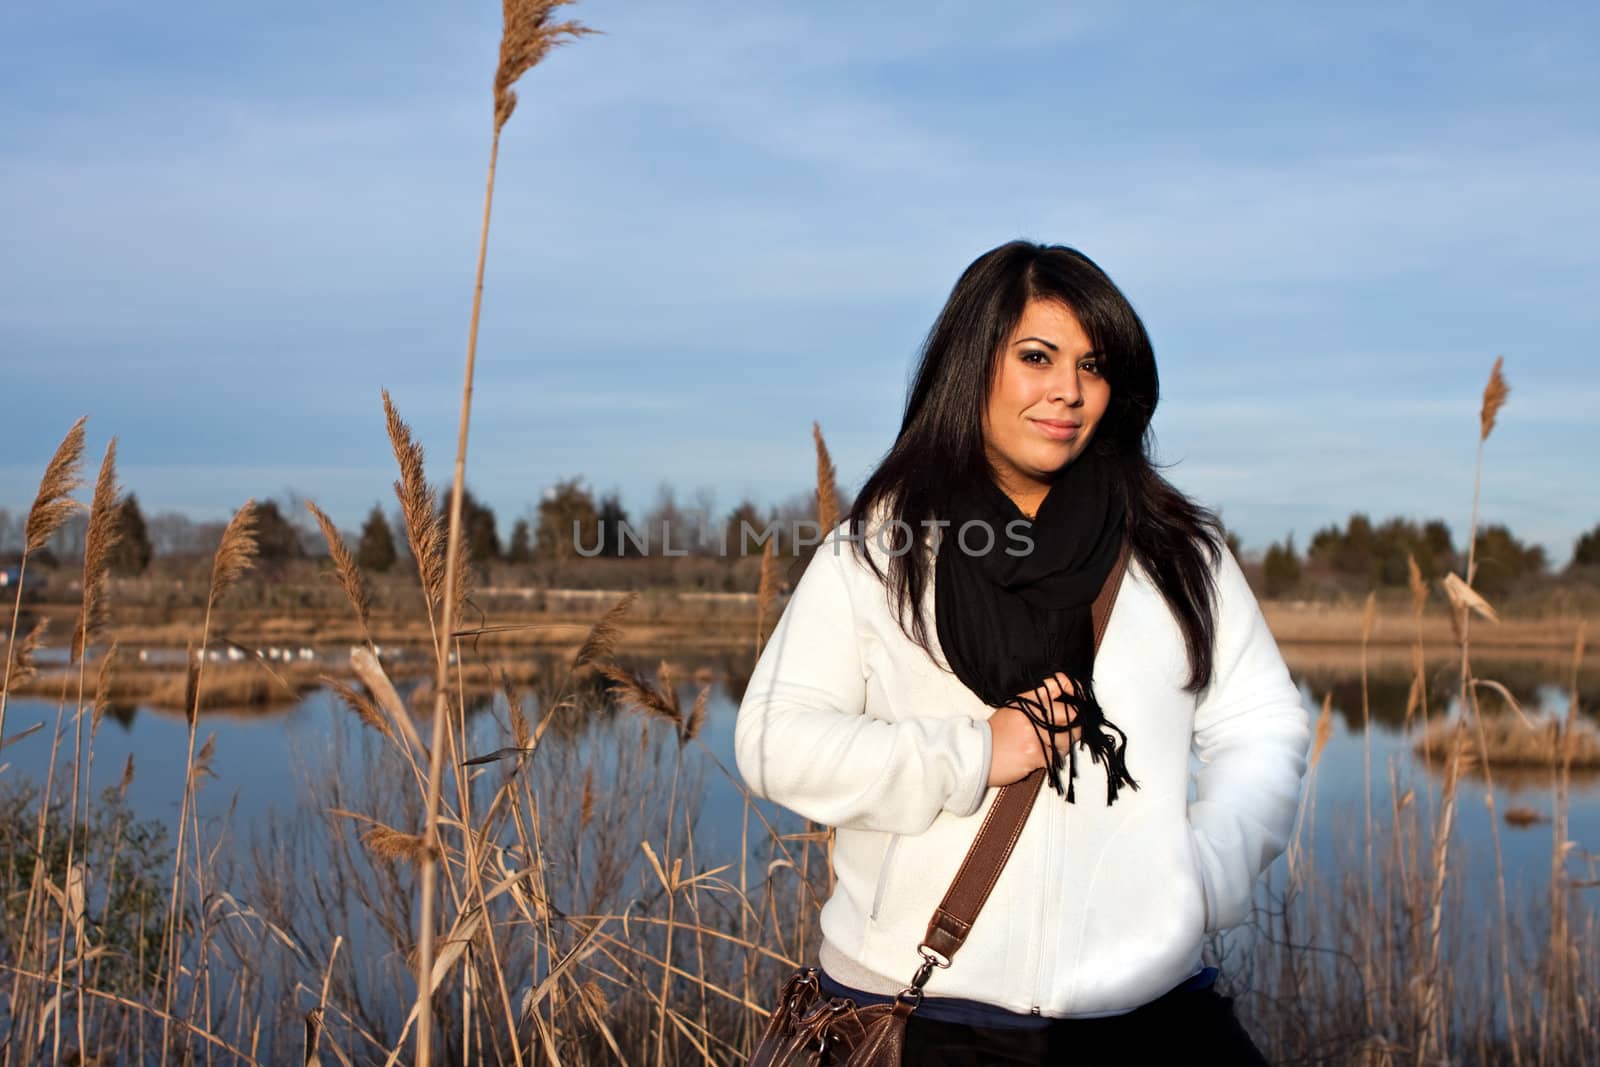 Hispanic Woman Outdoors by graficallyminded